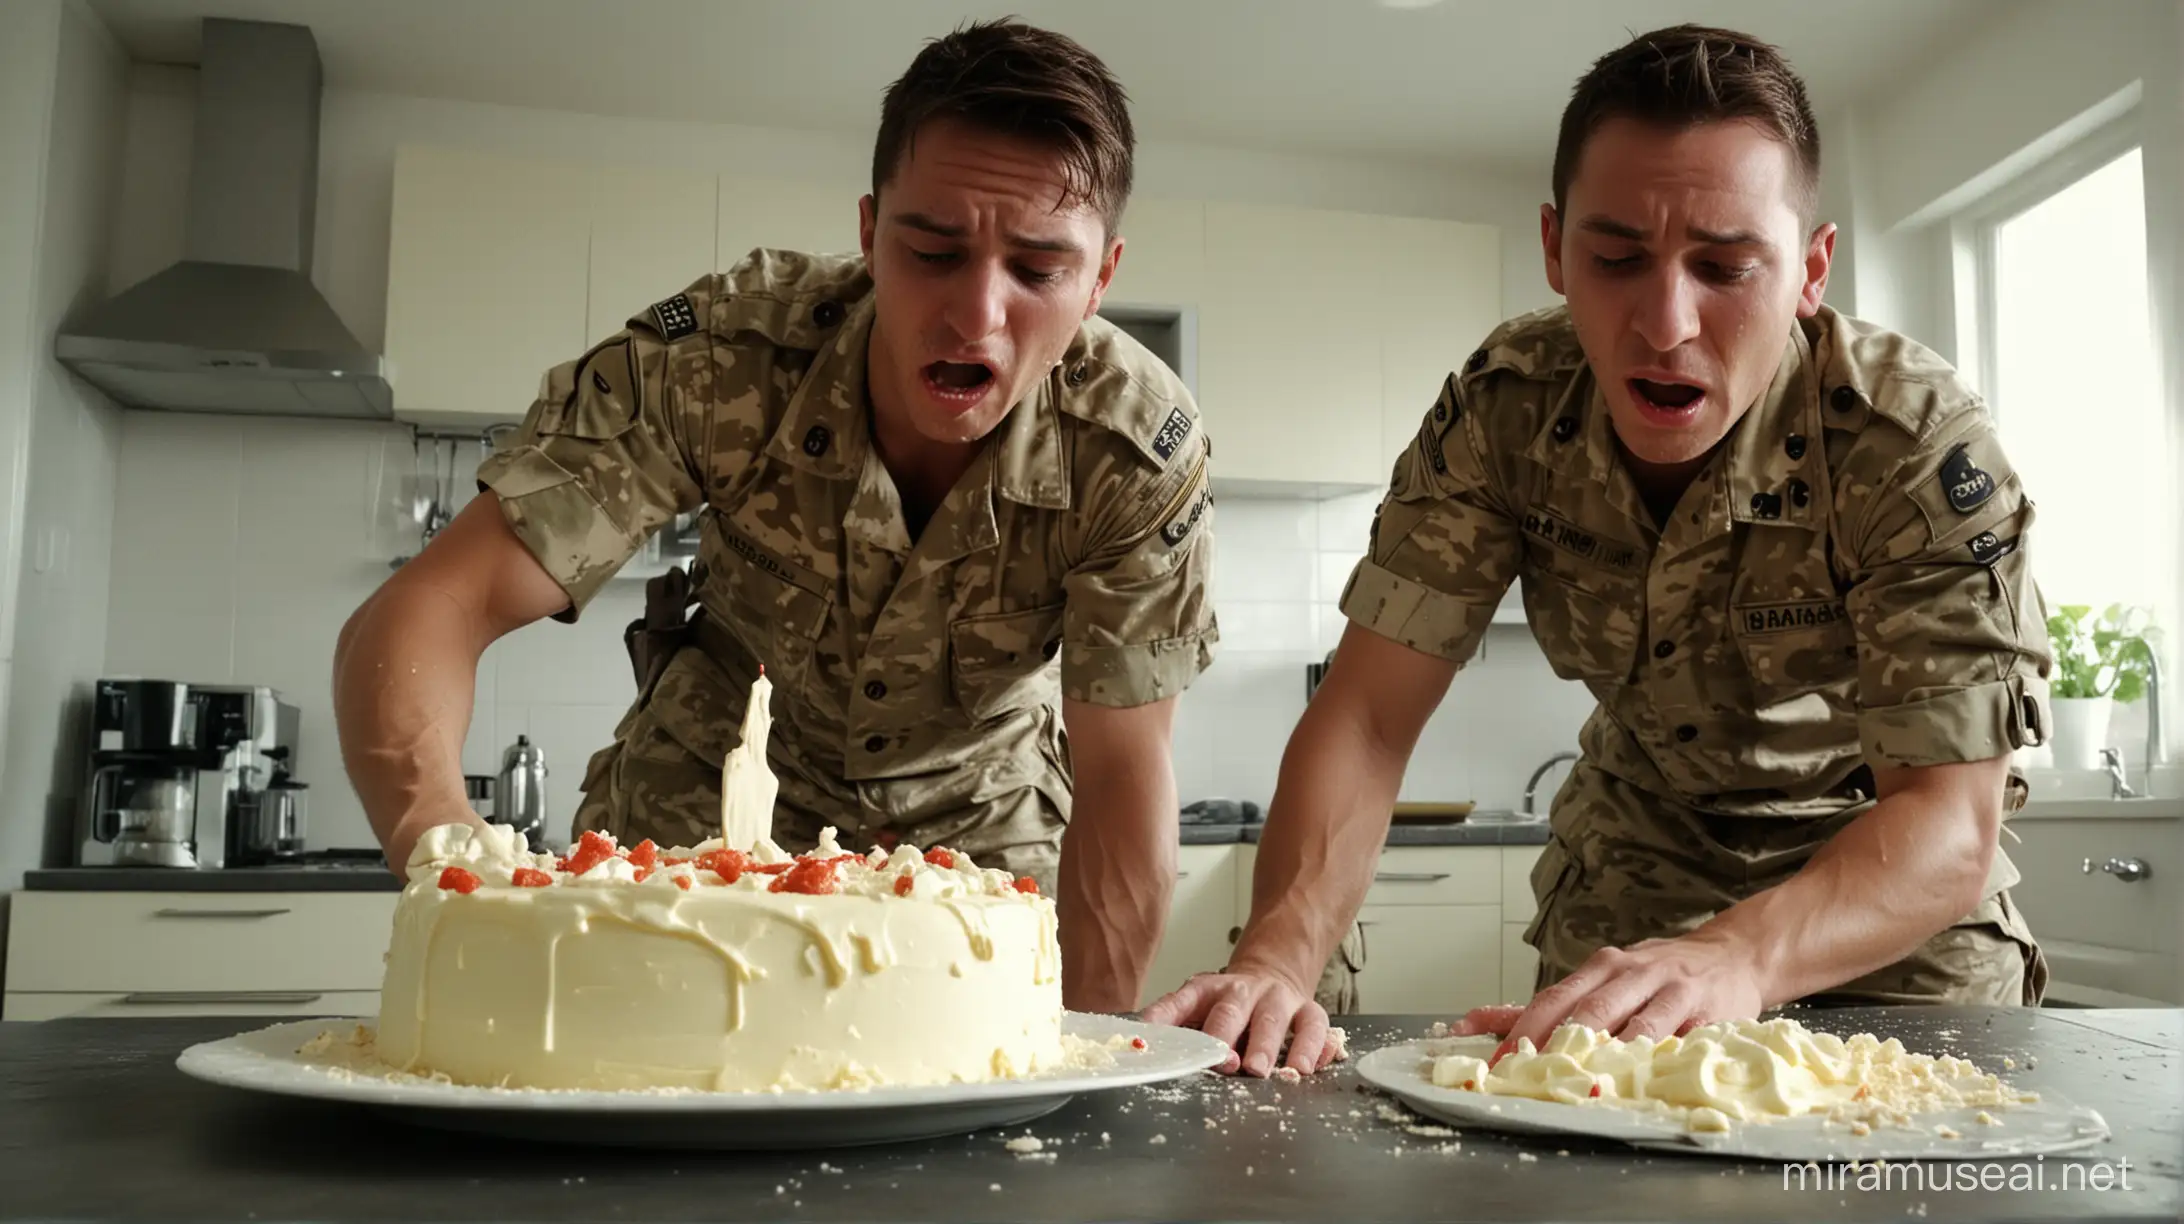 two uniformed soldier violence cake fighting, in kitchen, squeezing the testicles, impacts cake, hits cake, cake in ruin, face in cake, atractive face, uniform covered in cake and cream, pressing your face into the cake and cream, trampling the cake, , back pocket, sex and violence, dramatic angle, extreme angle shot